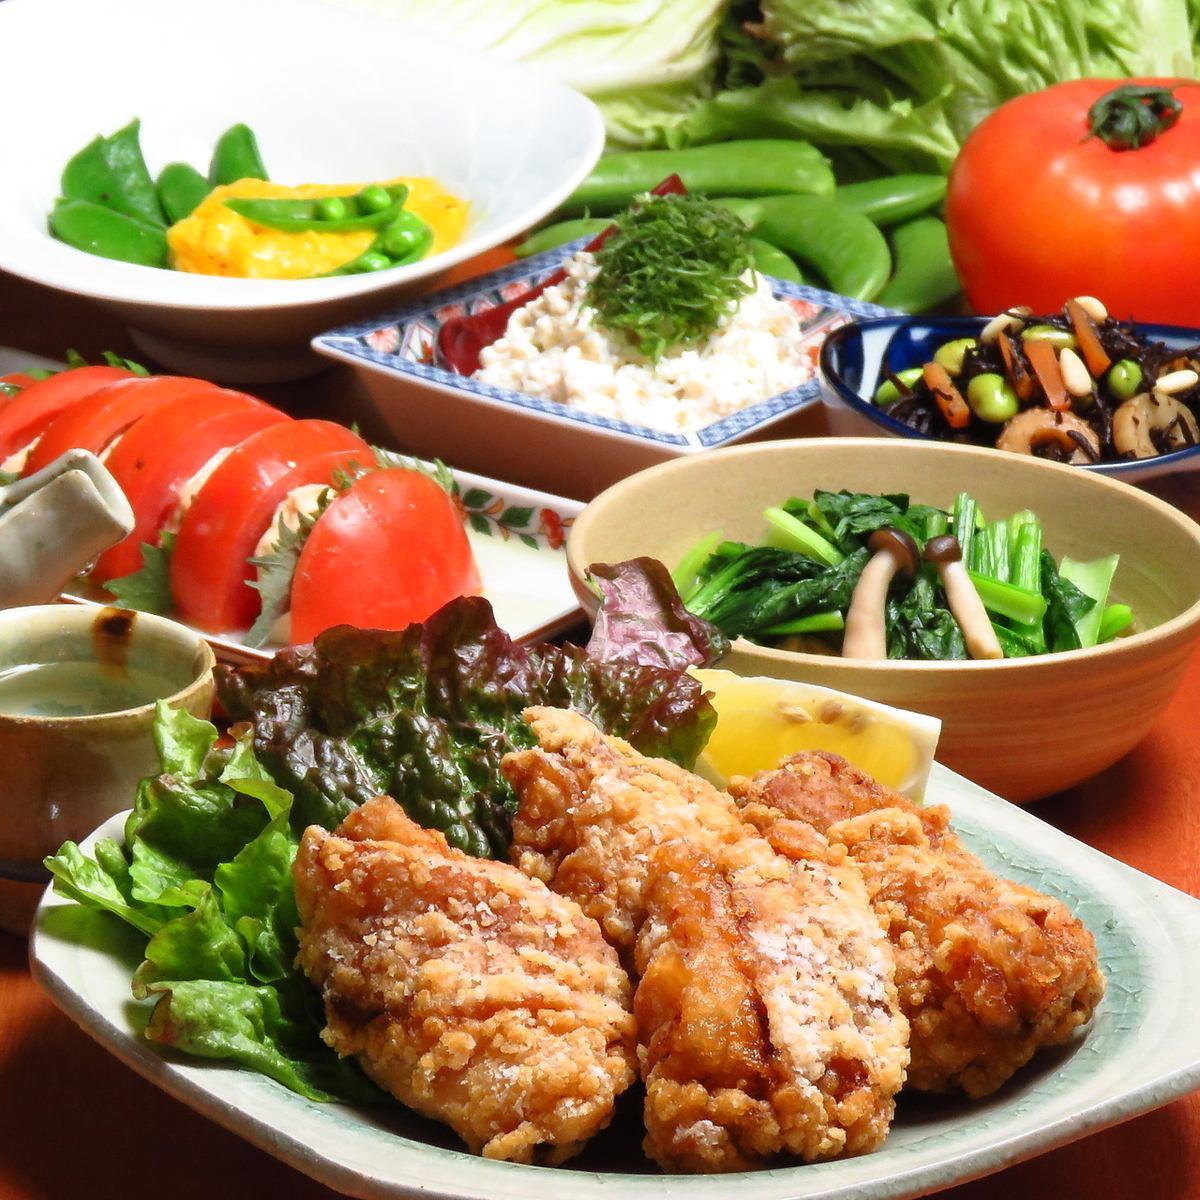 Otegoro lunch set meal ★ You can enjoy body-friendly dishes ♪